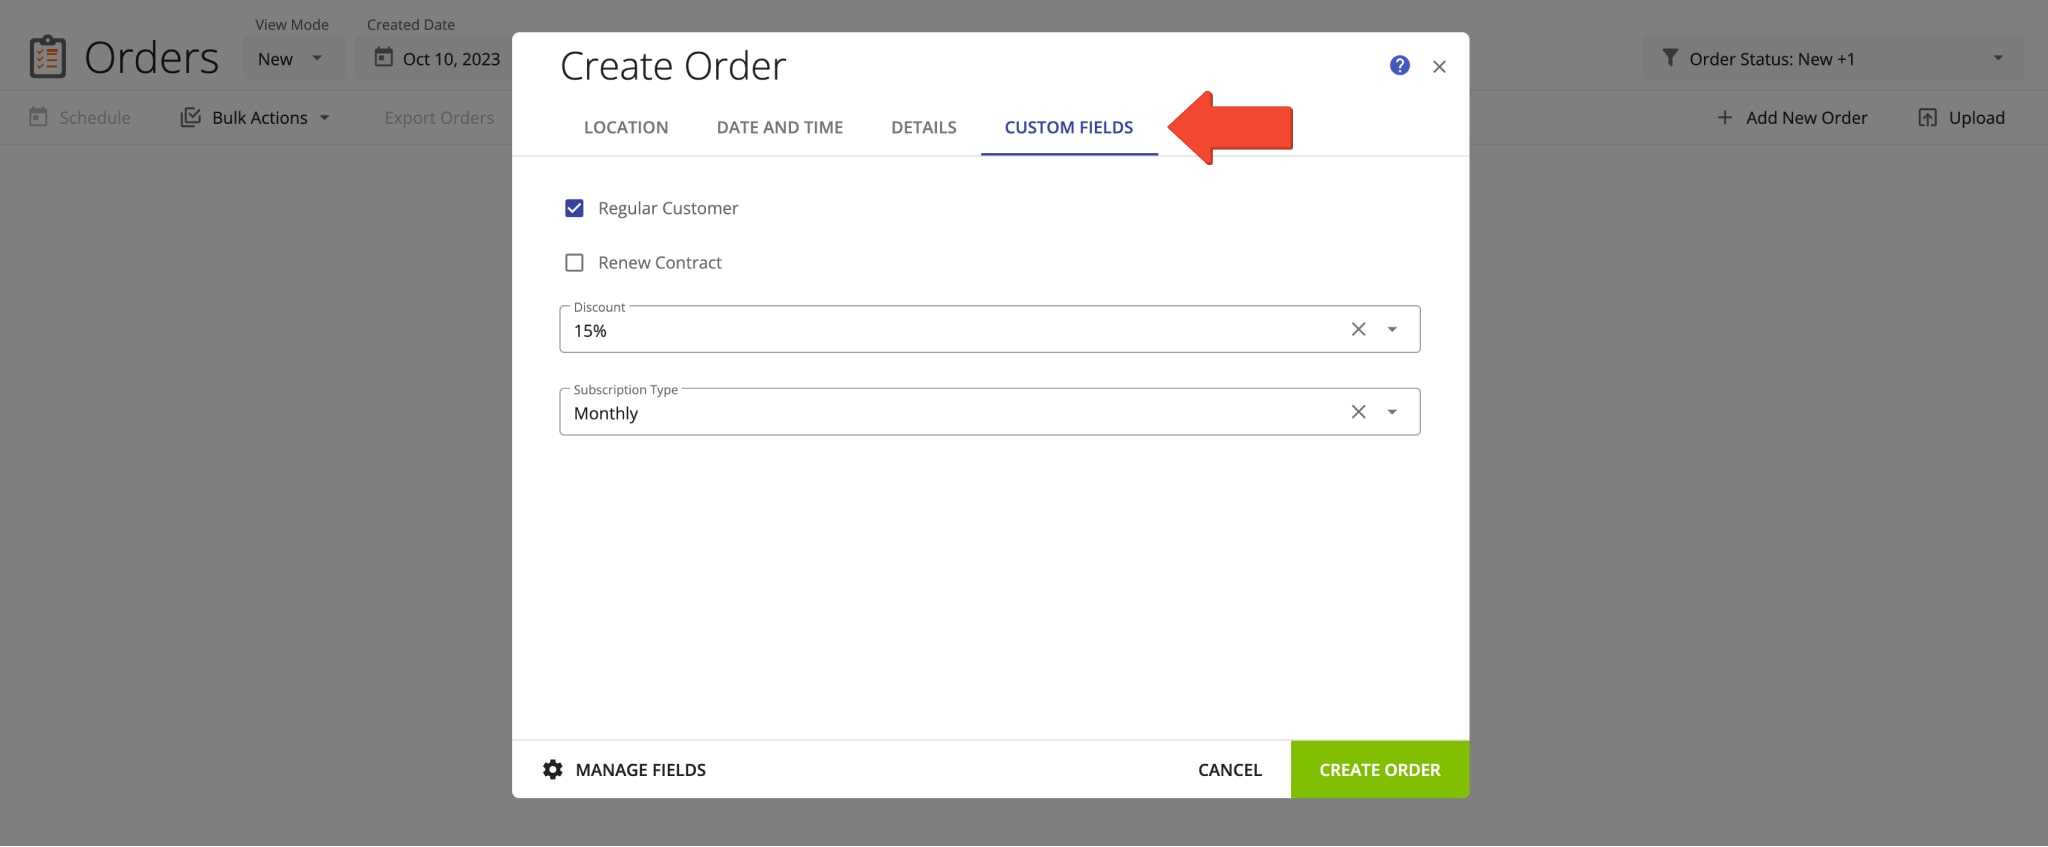 Add Order Custom Fields to the orders with custom information and details.